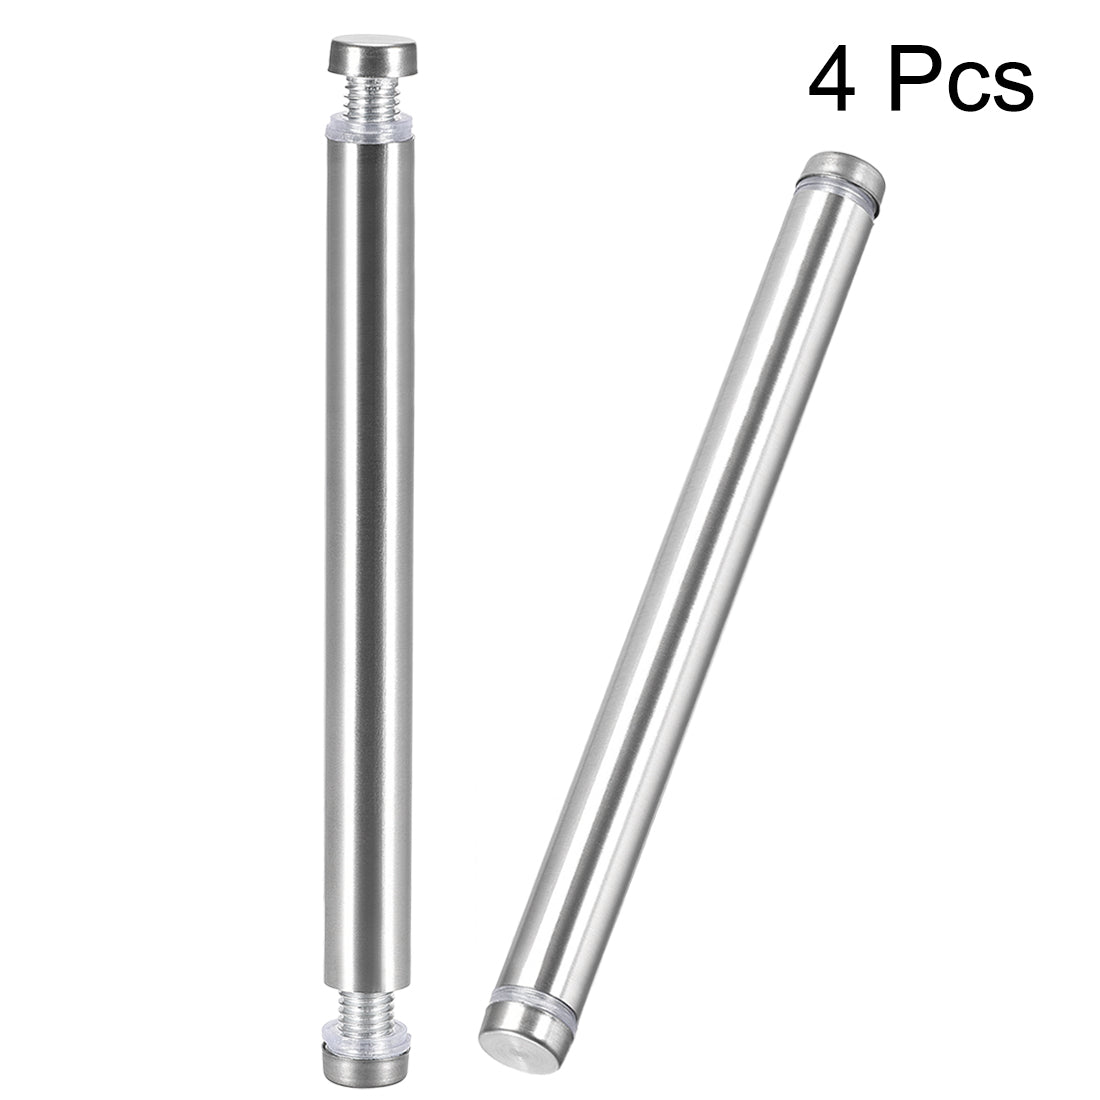 uxcell Uxcell Glass Standoff Double Head Stainless Steel Standoff Holder 12mm x 134mm 4 Pcs